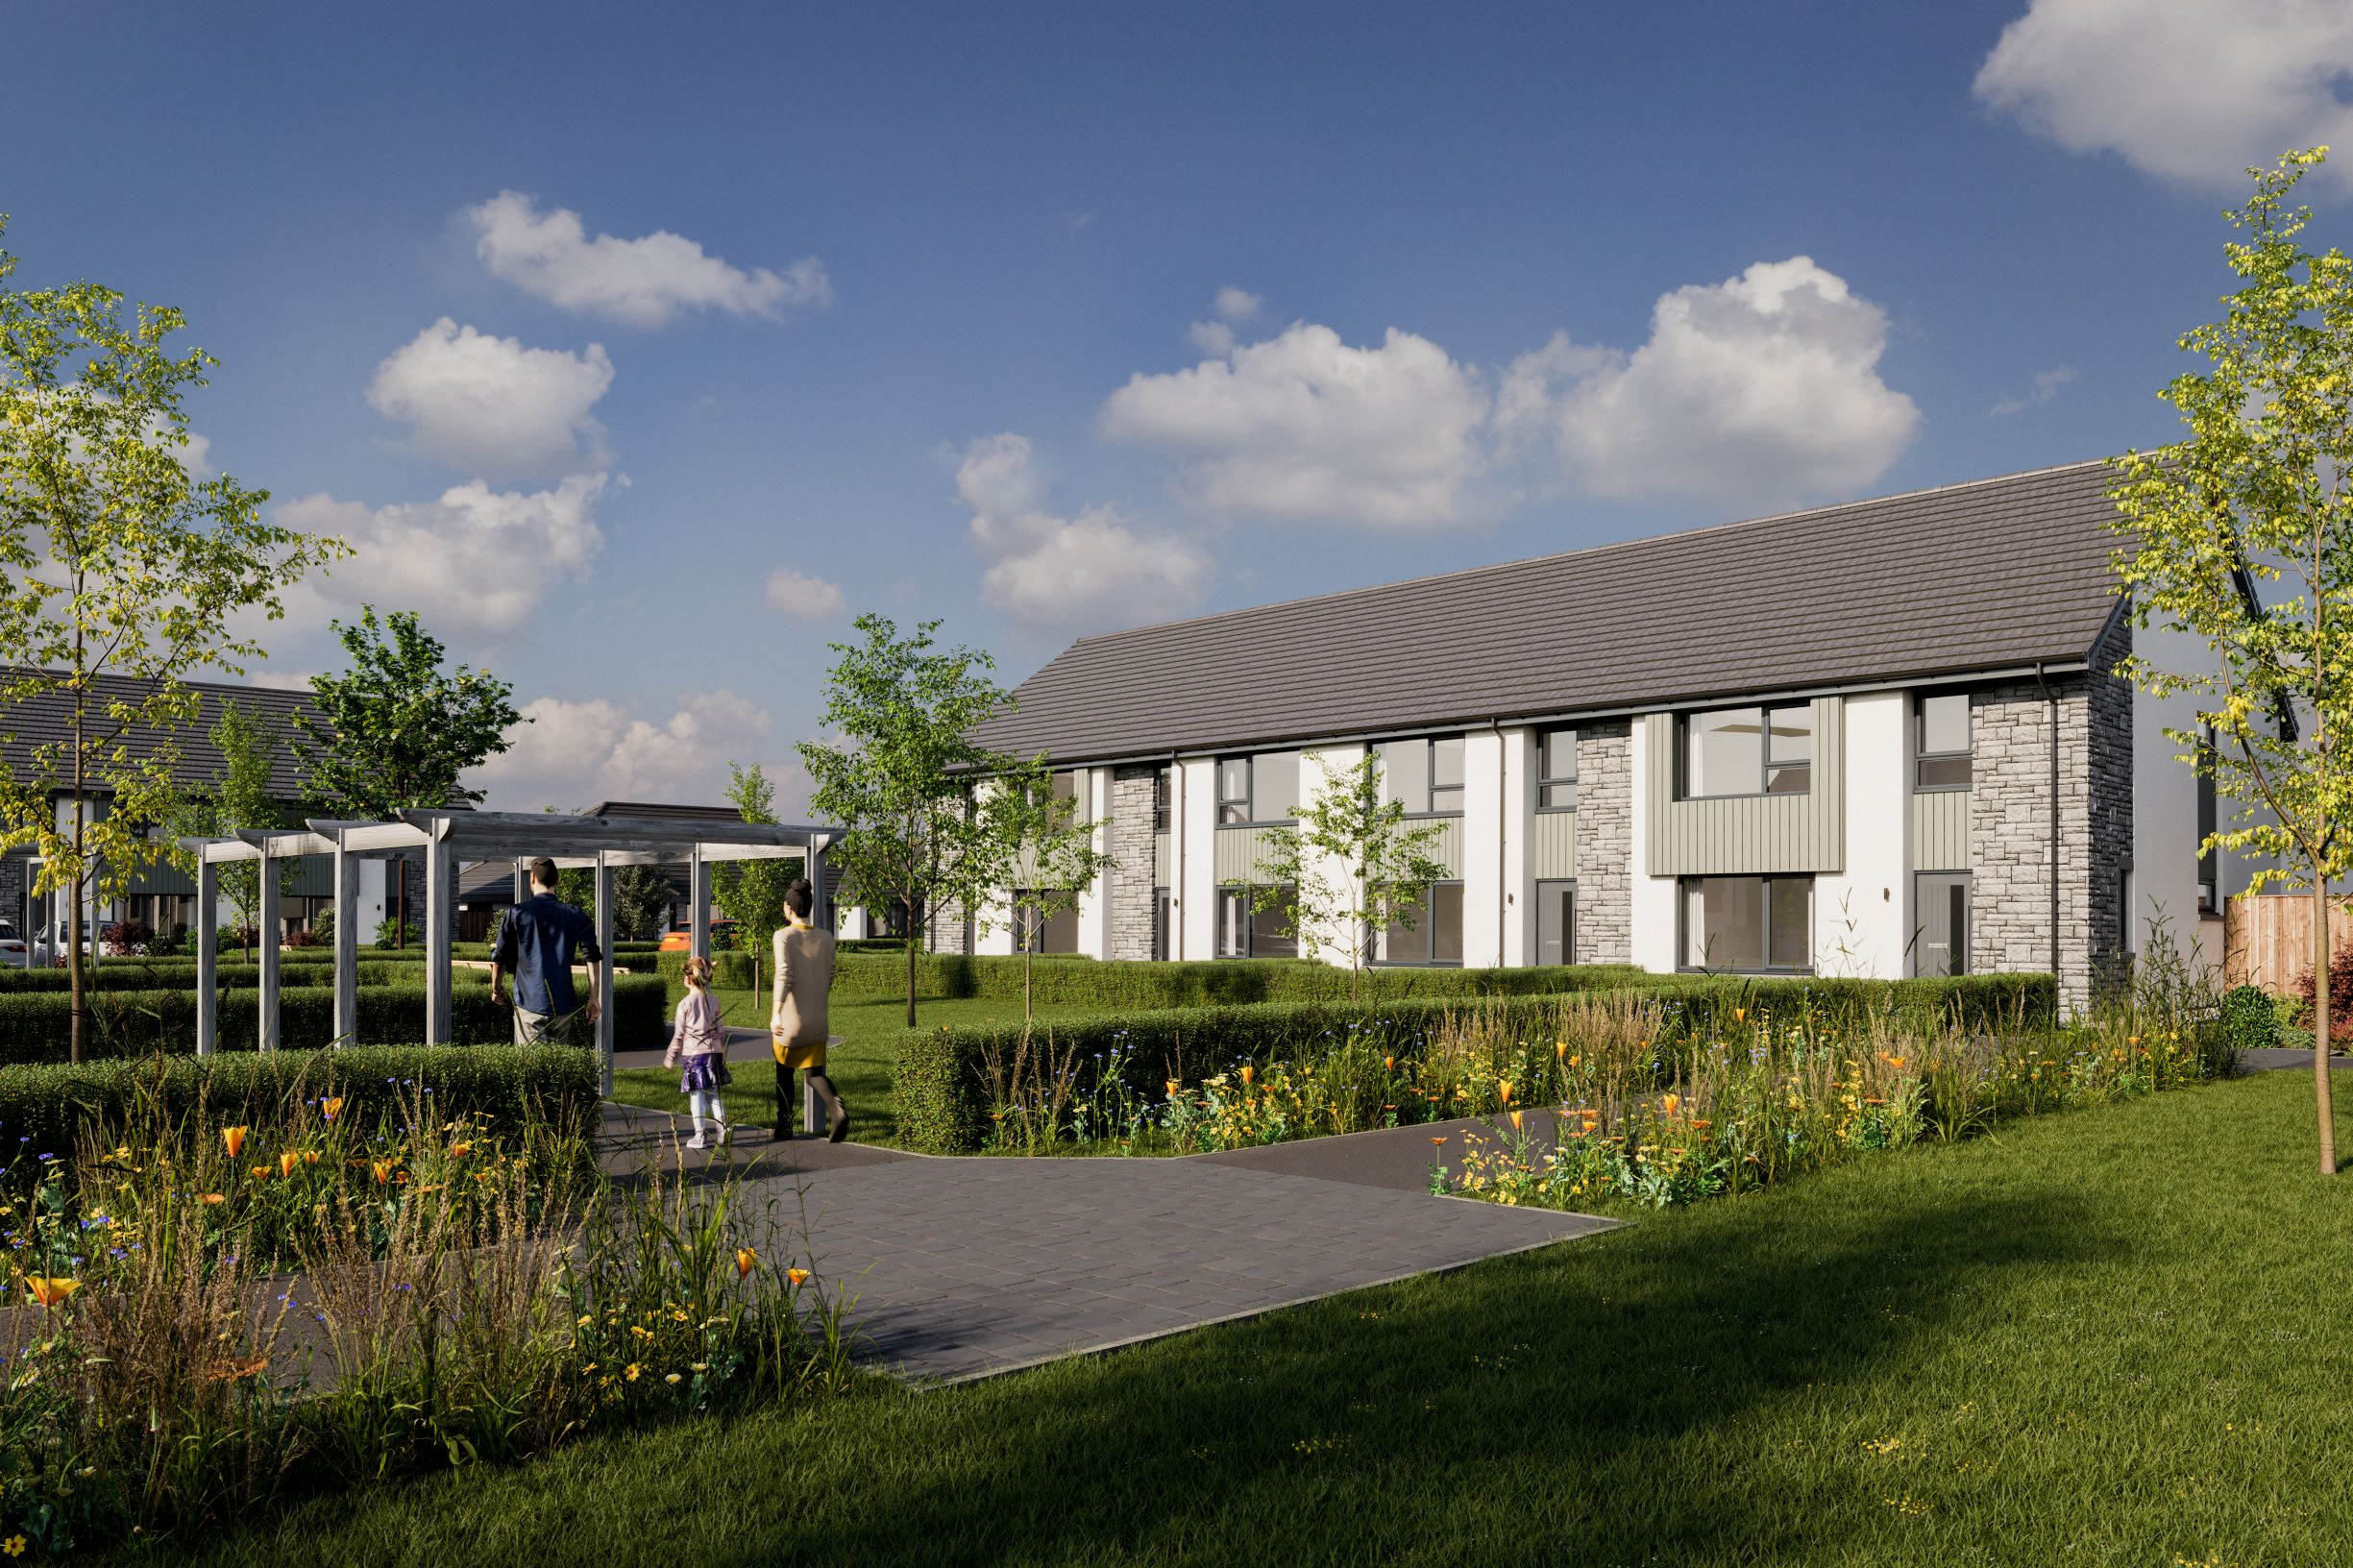 CALA Homes secures consent for 89 homes on Killearn site